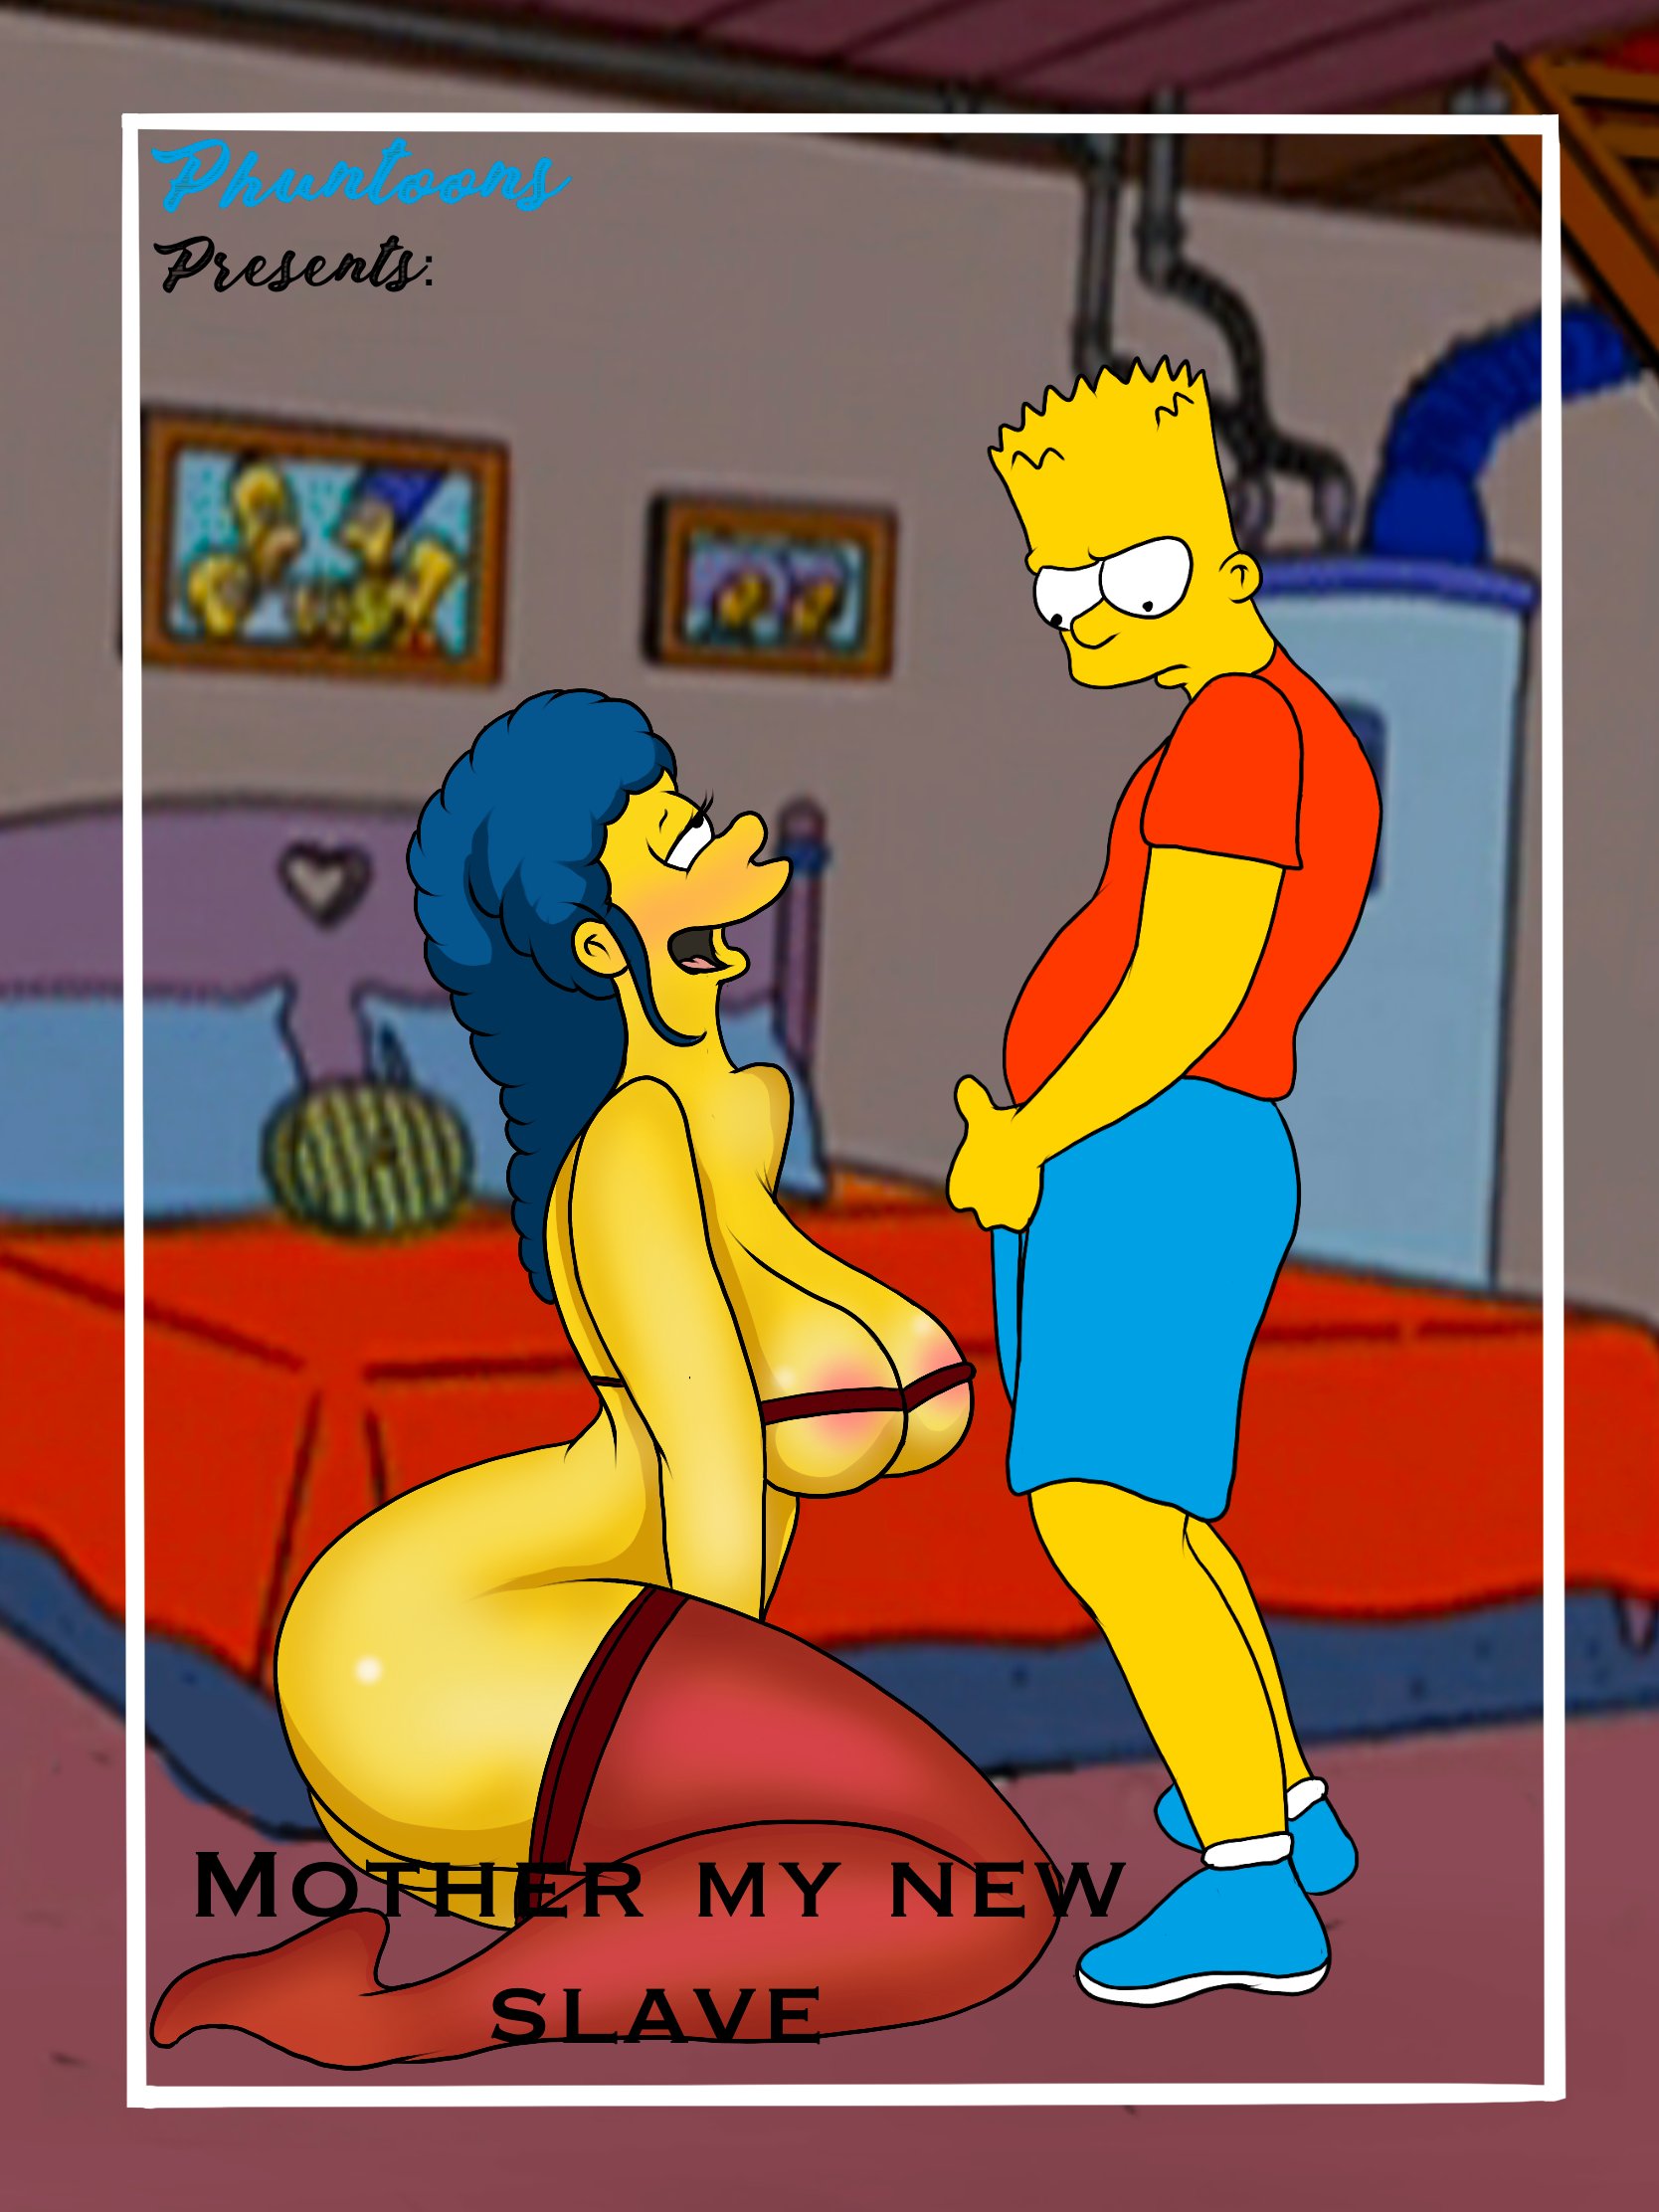 Anime Slave Story - Mother my new Slave cartoon by Bobs200 - FreeAdultComix